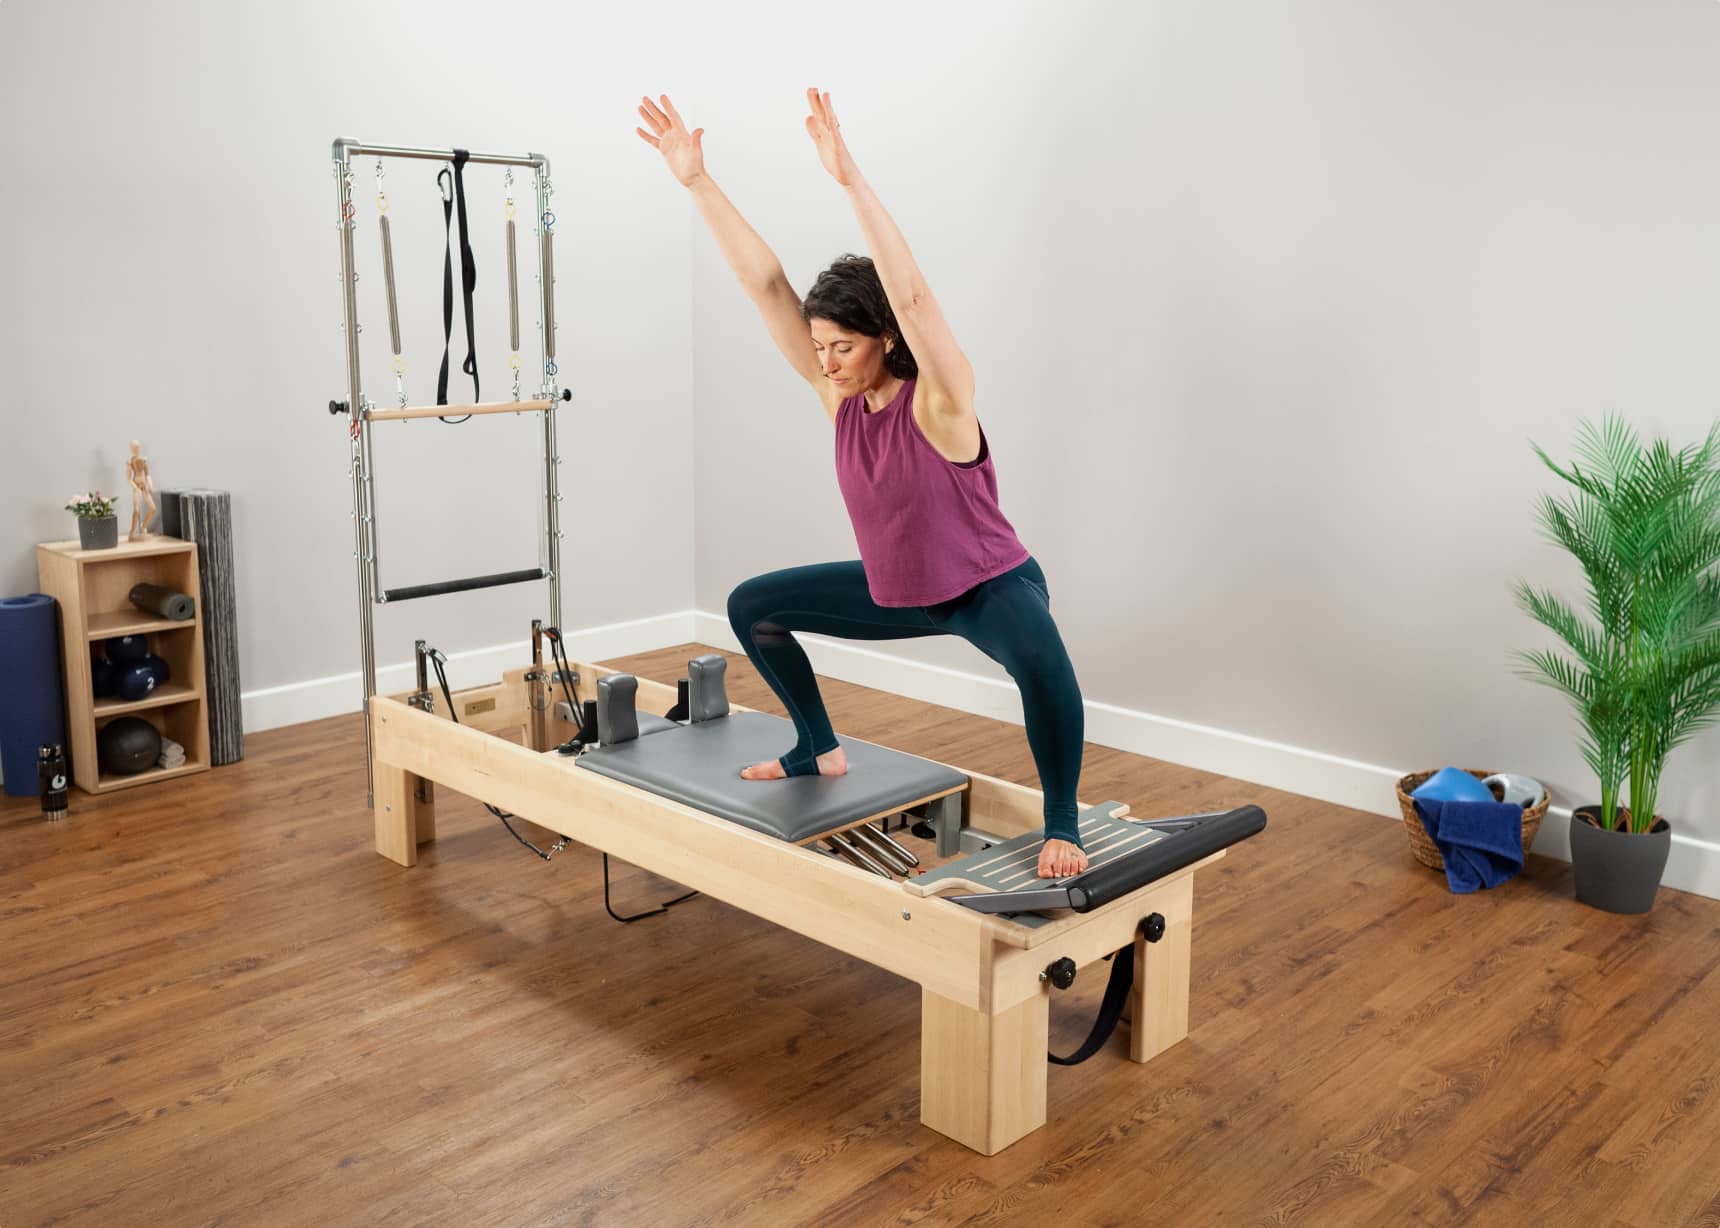 Add variety to your workouts with this versatile, drop-in accessory for your Studio Reformer